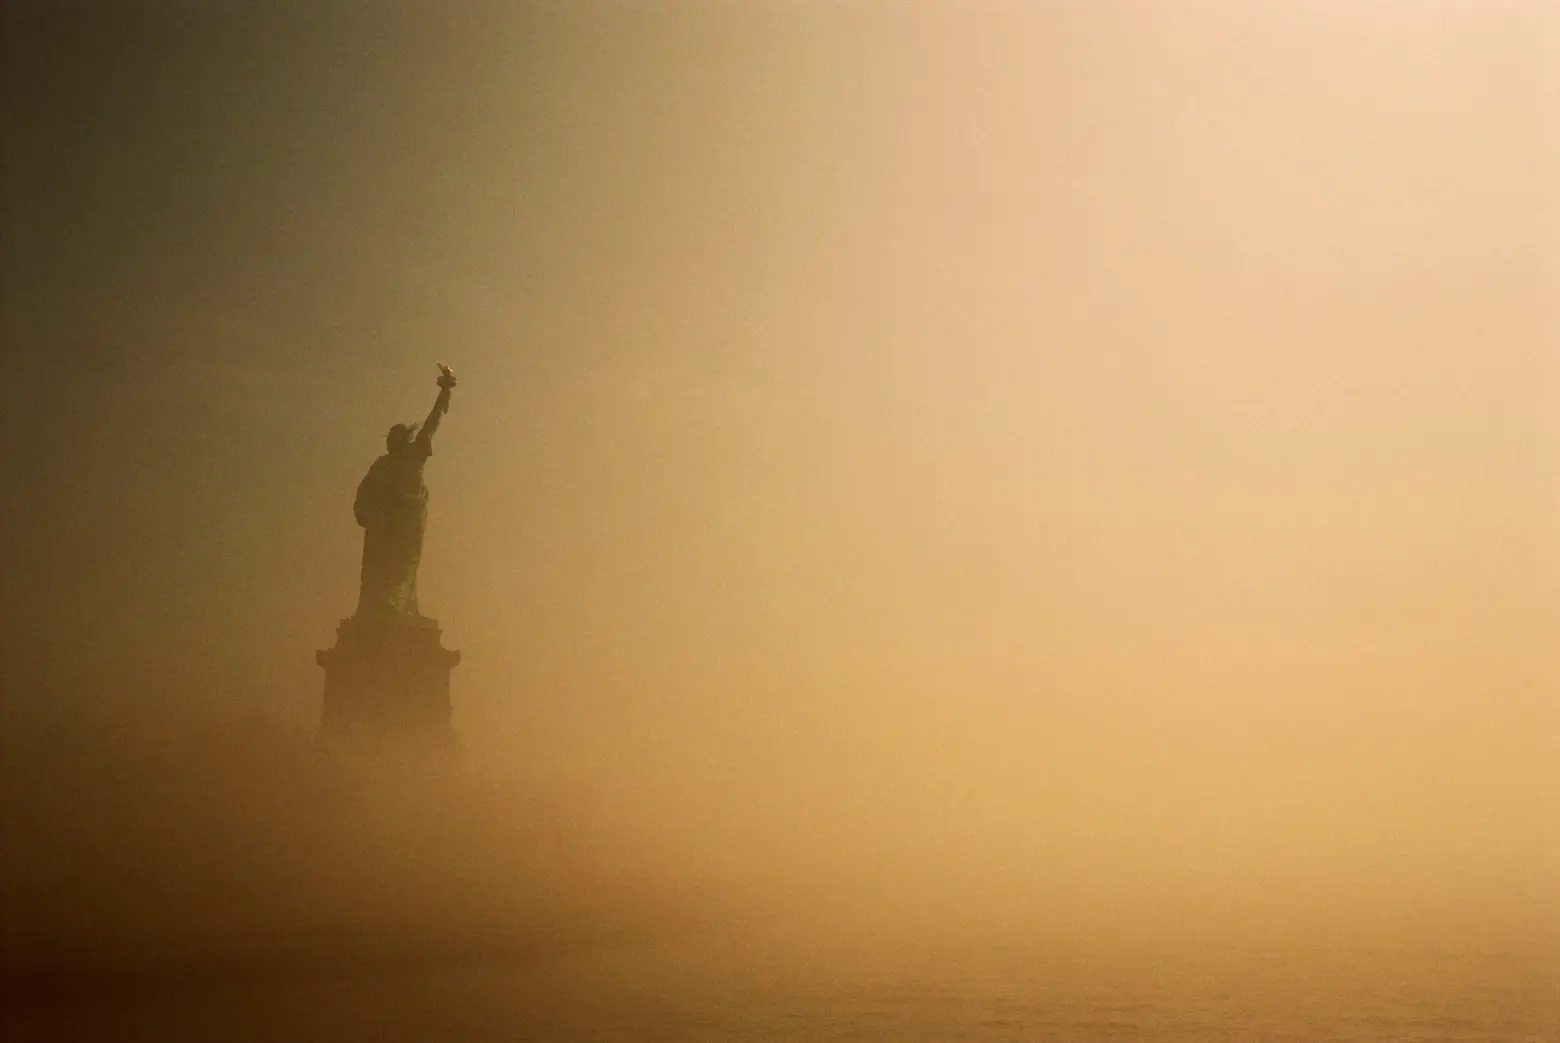 Statue of Liberty, Ira Block, National Geographic, NYC phtography